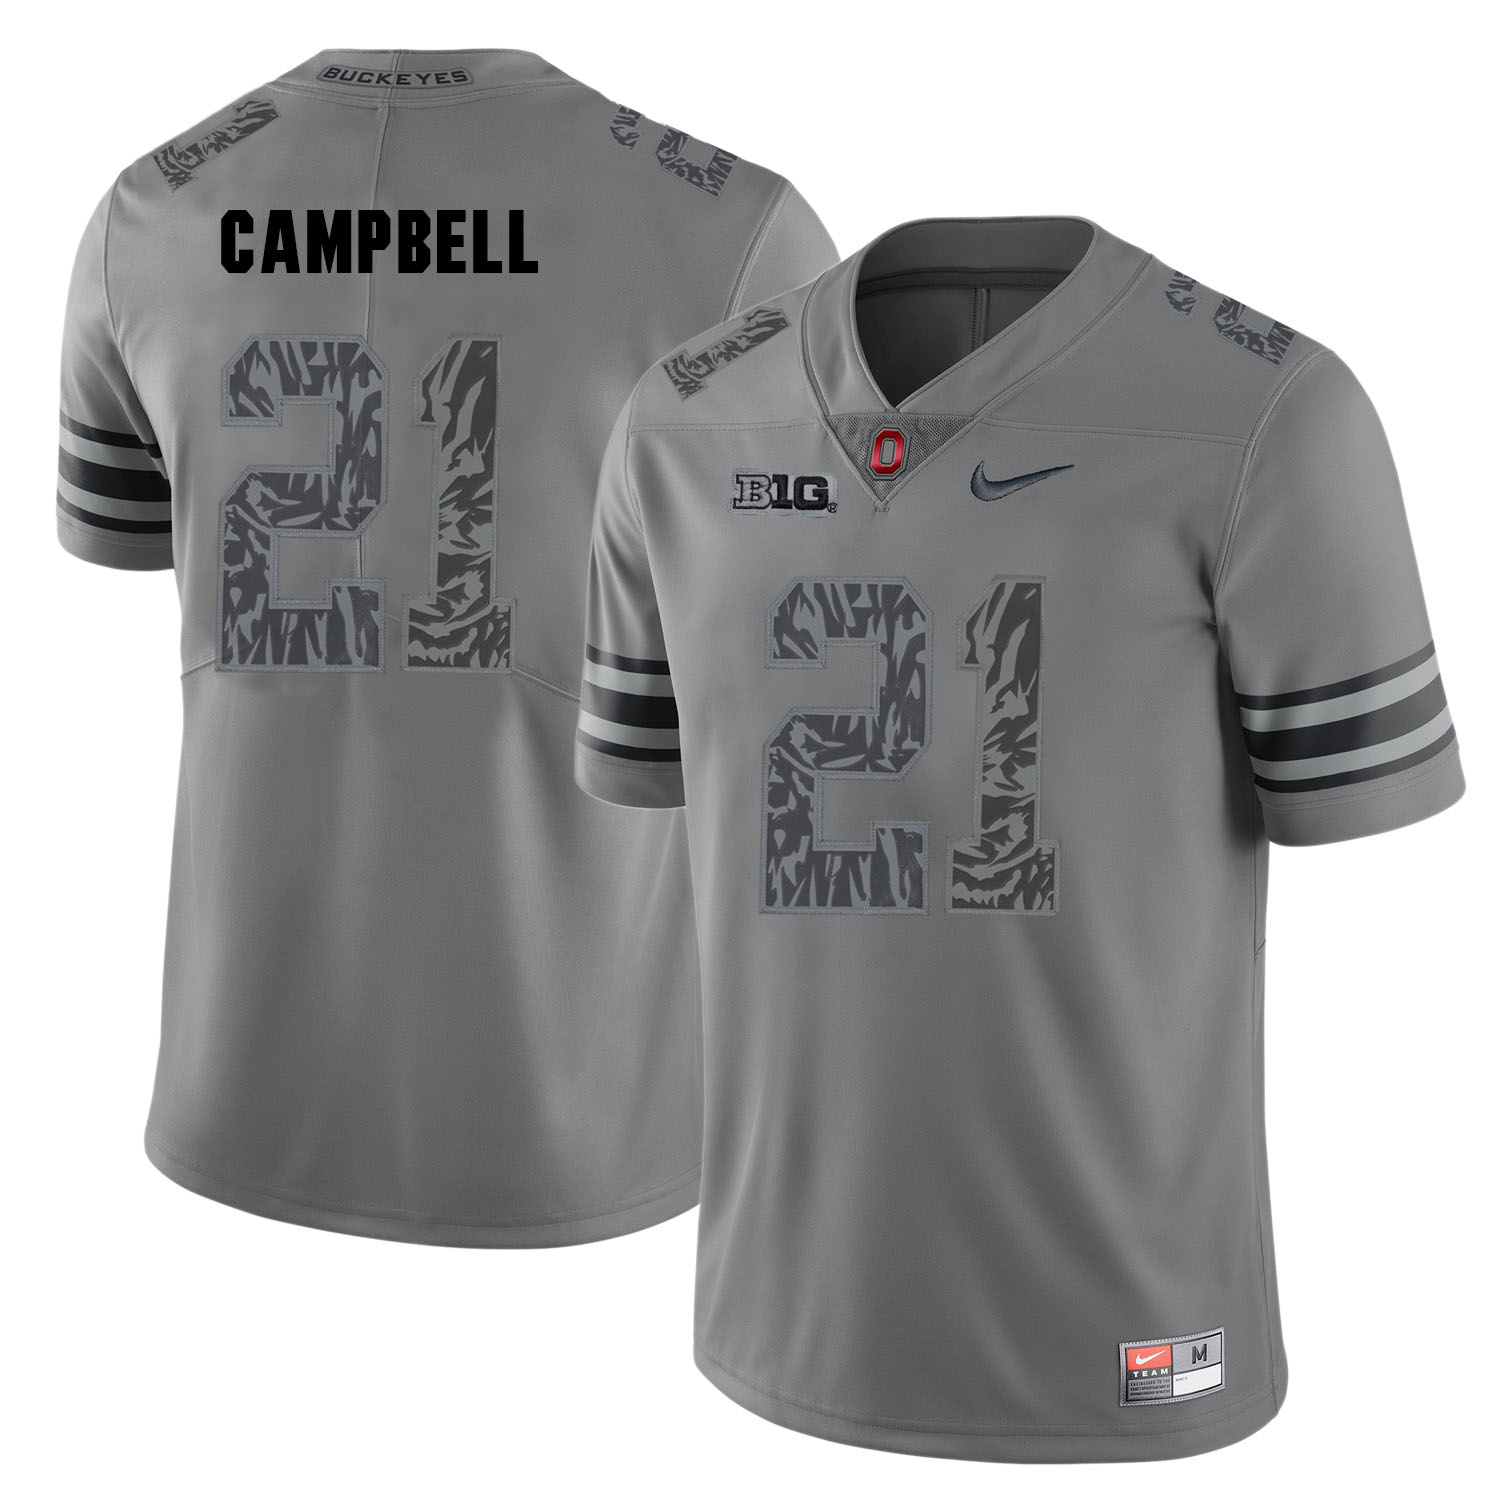 Ohio State Buckeyes 21 Parris Campbell Gray Shadow College Football Jersey